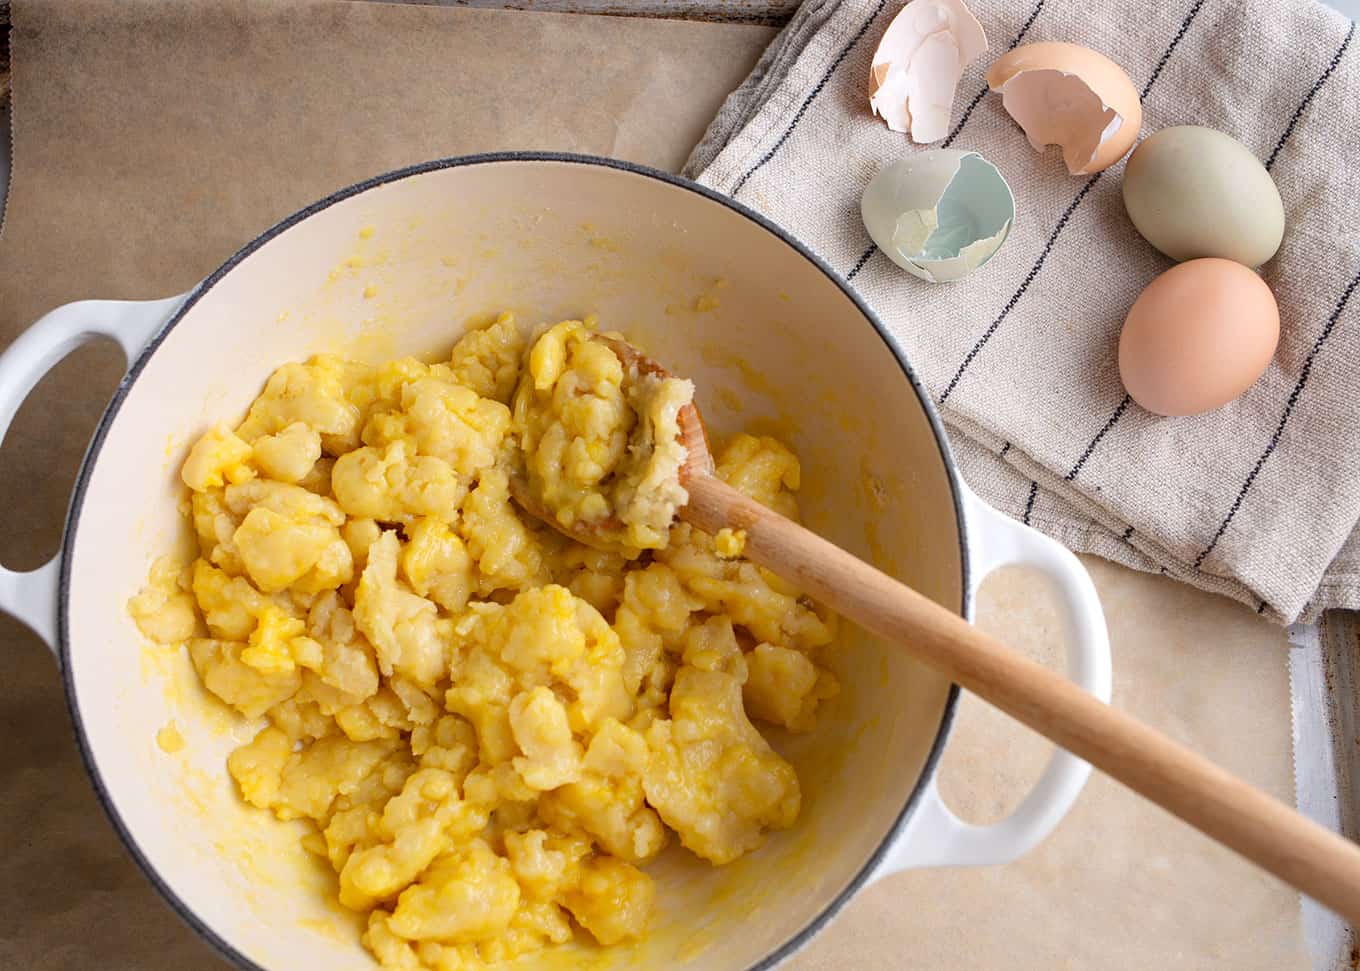 Mixing the eggs into the dough in the Dutch oven one at a time